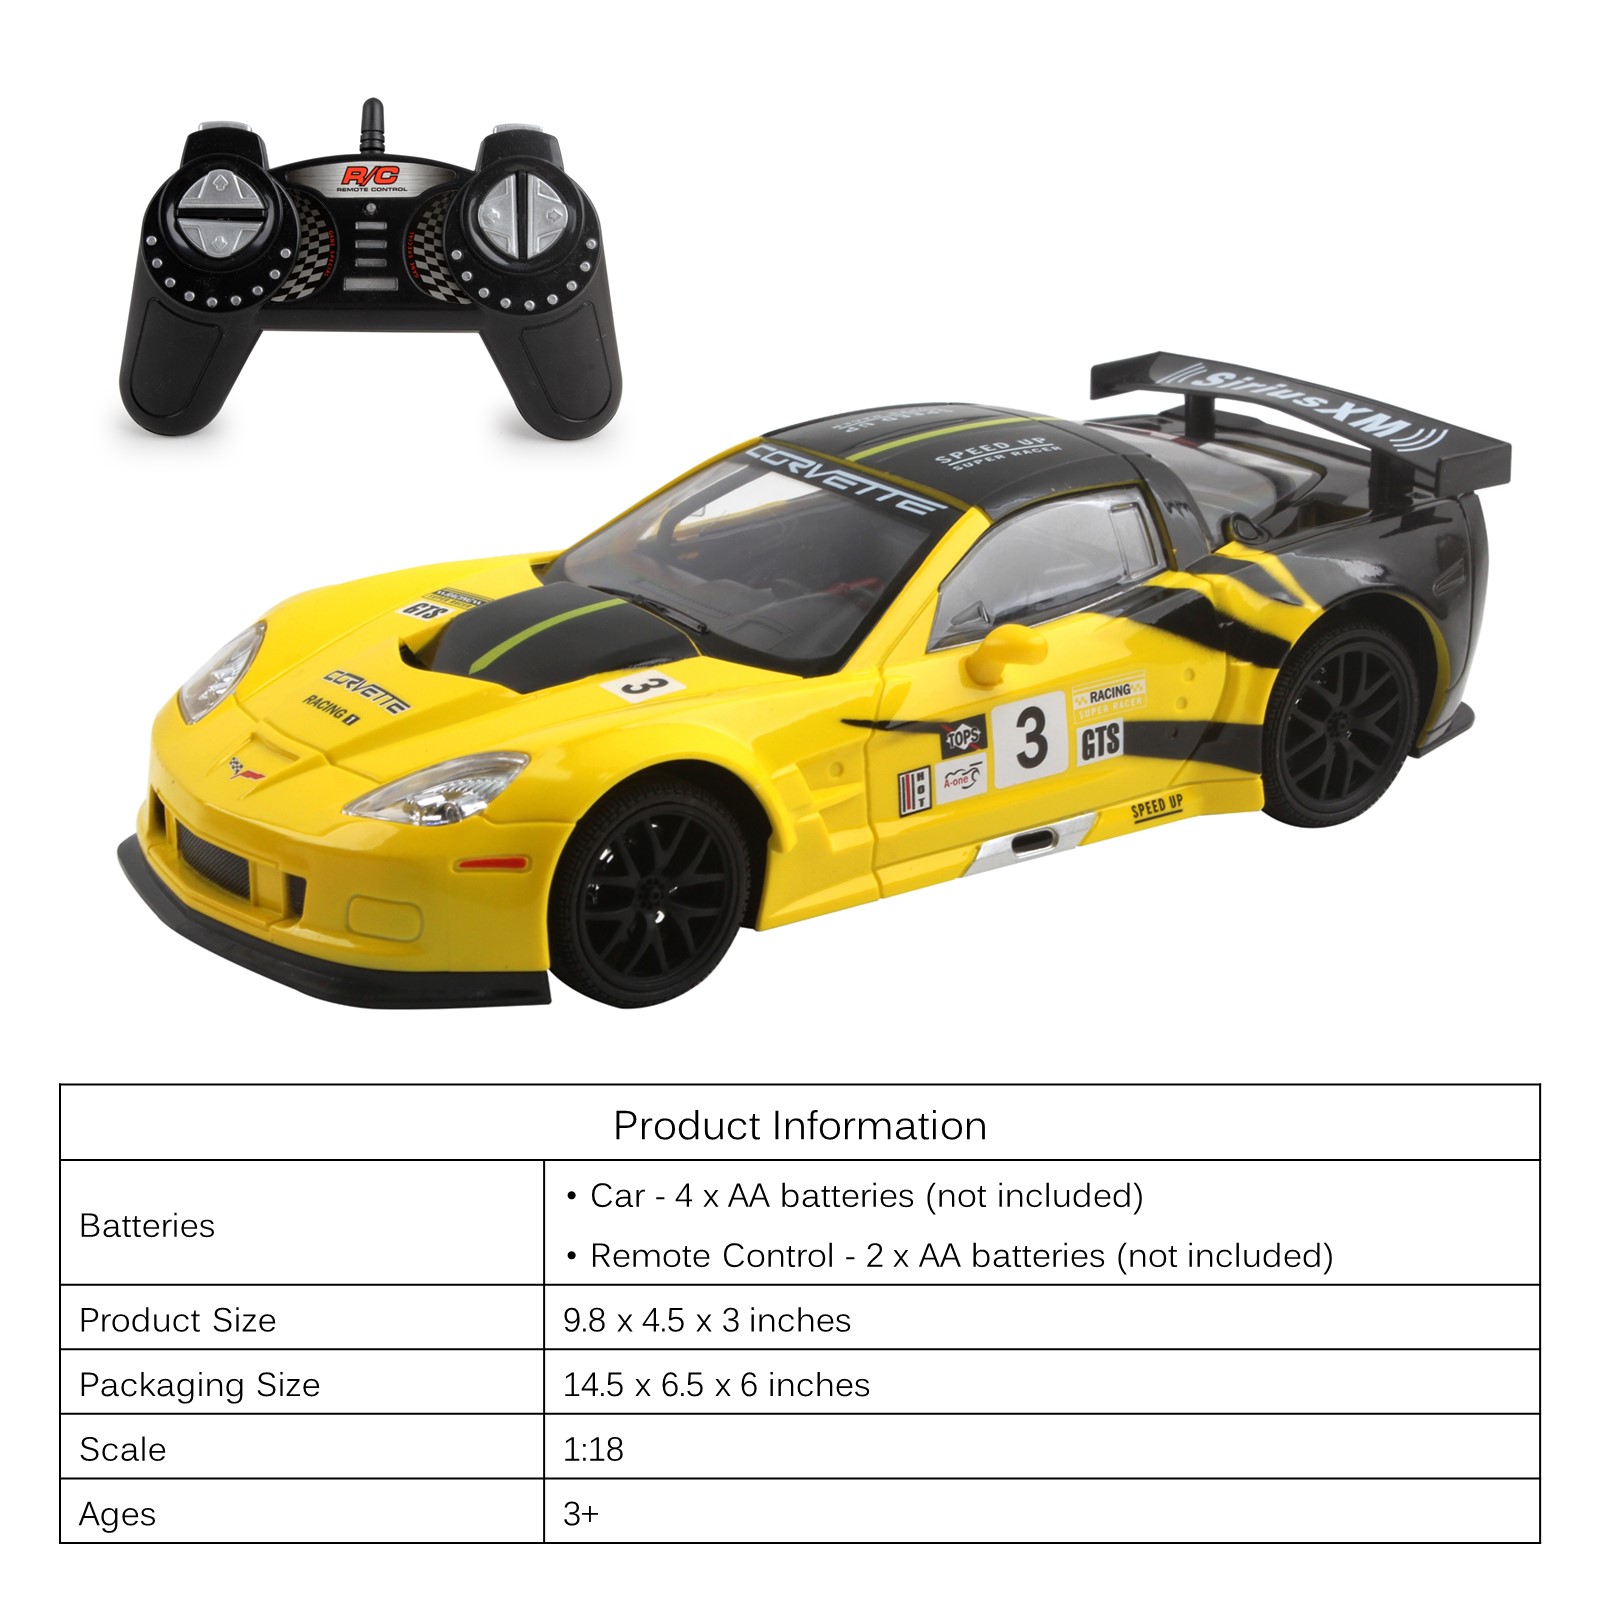 Vokodo RC Super Car 118 Scale Remote Control Full Function Corvette with Working LED Headlights Easy to Operate Kids Toy Race Vehicle Perfect Exotic Sports Model Great Gift for Children Boys Girls TL-85